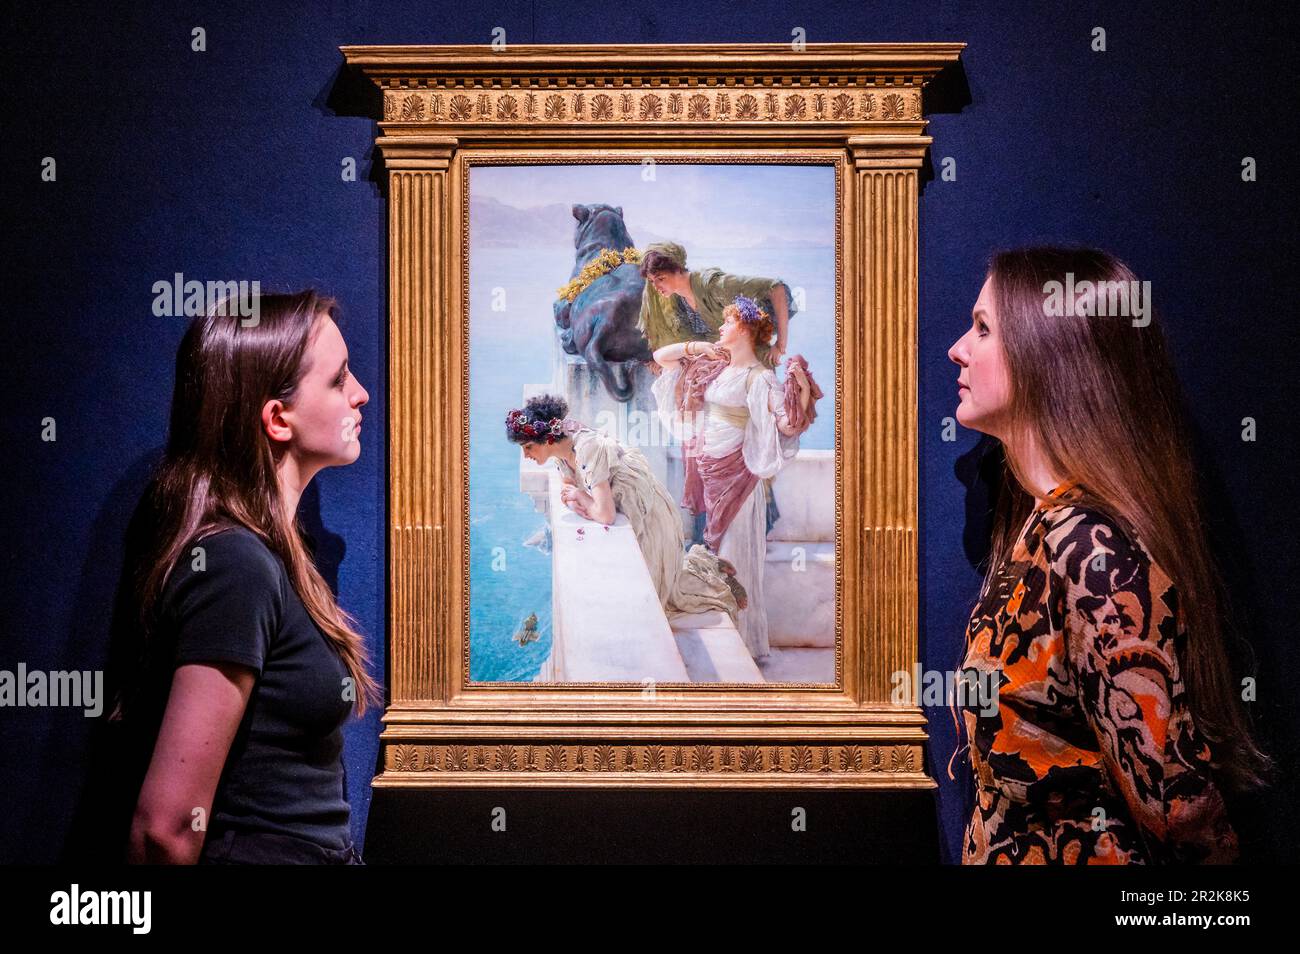 London, UK. 19 May 2023. Sir Lawrence Alma-Tadema, A Coign of Vantage, oil on panel, Estimate $2,500,000-3,500,000 - The second installment of the Ann & Gordon Getty Collection: Temple of Wings sale at Christies. Following the October 2022 sale in June this presents the contents of the Gettys' historic, turn of the century, Berkeley property: Temple of Wings. The Collection will be sold over one live auction in New York - taking place on June 14, and two online sales ending on June 15. Proceeds will benefit selected arts and science organizations designed by Ann and Gordon Getty. Credit: Guy Stock Photo